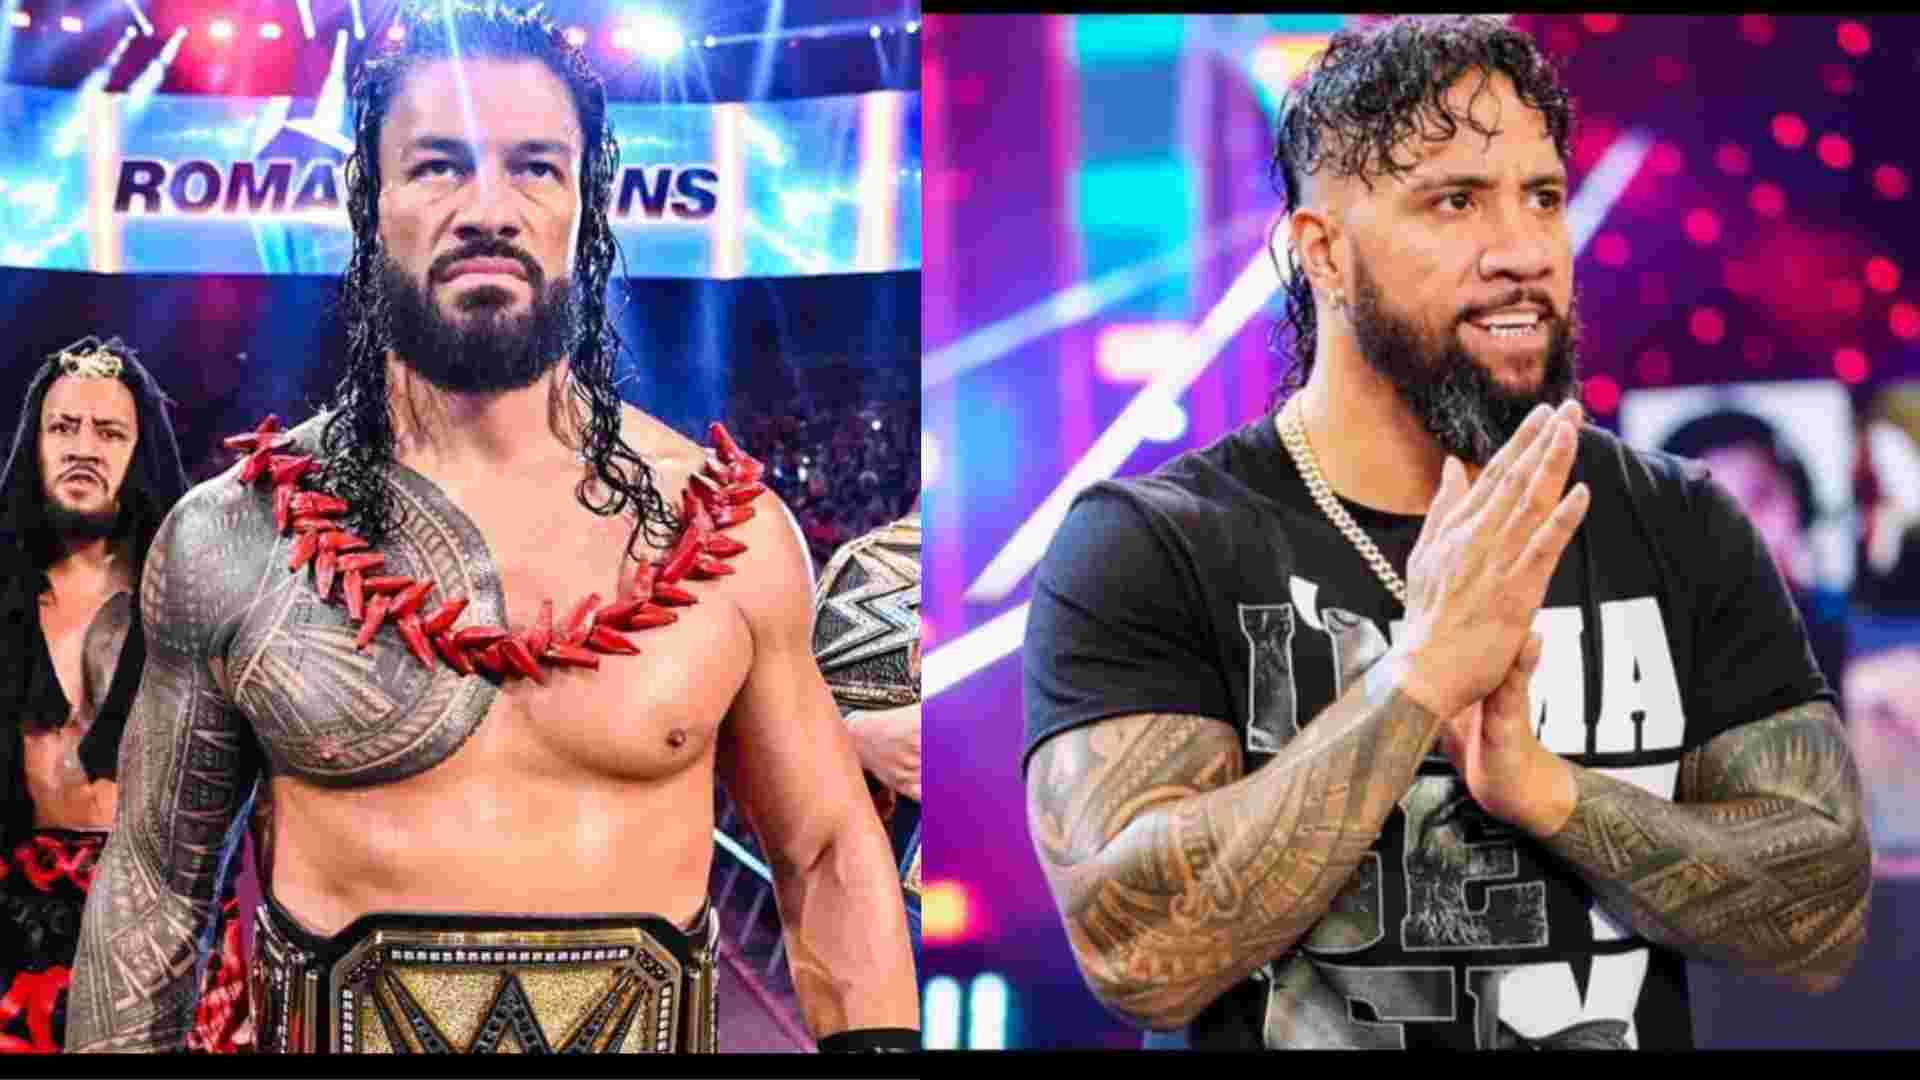 Will Jey Uso bring the Tribal Chief down to reclaim the Usos’ honor at WWE Summerslam 2023?